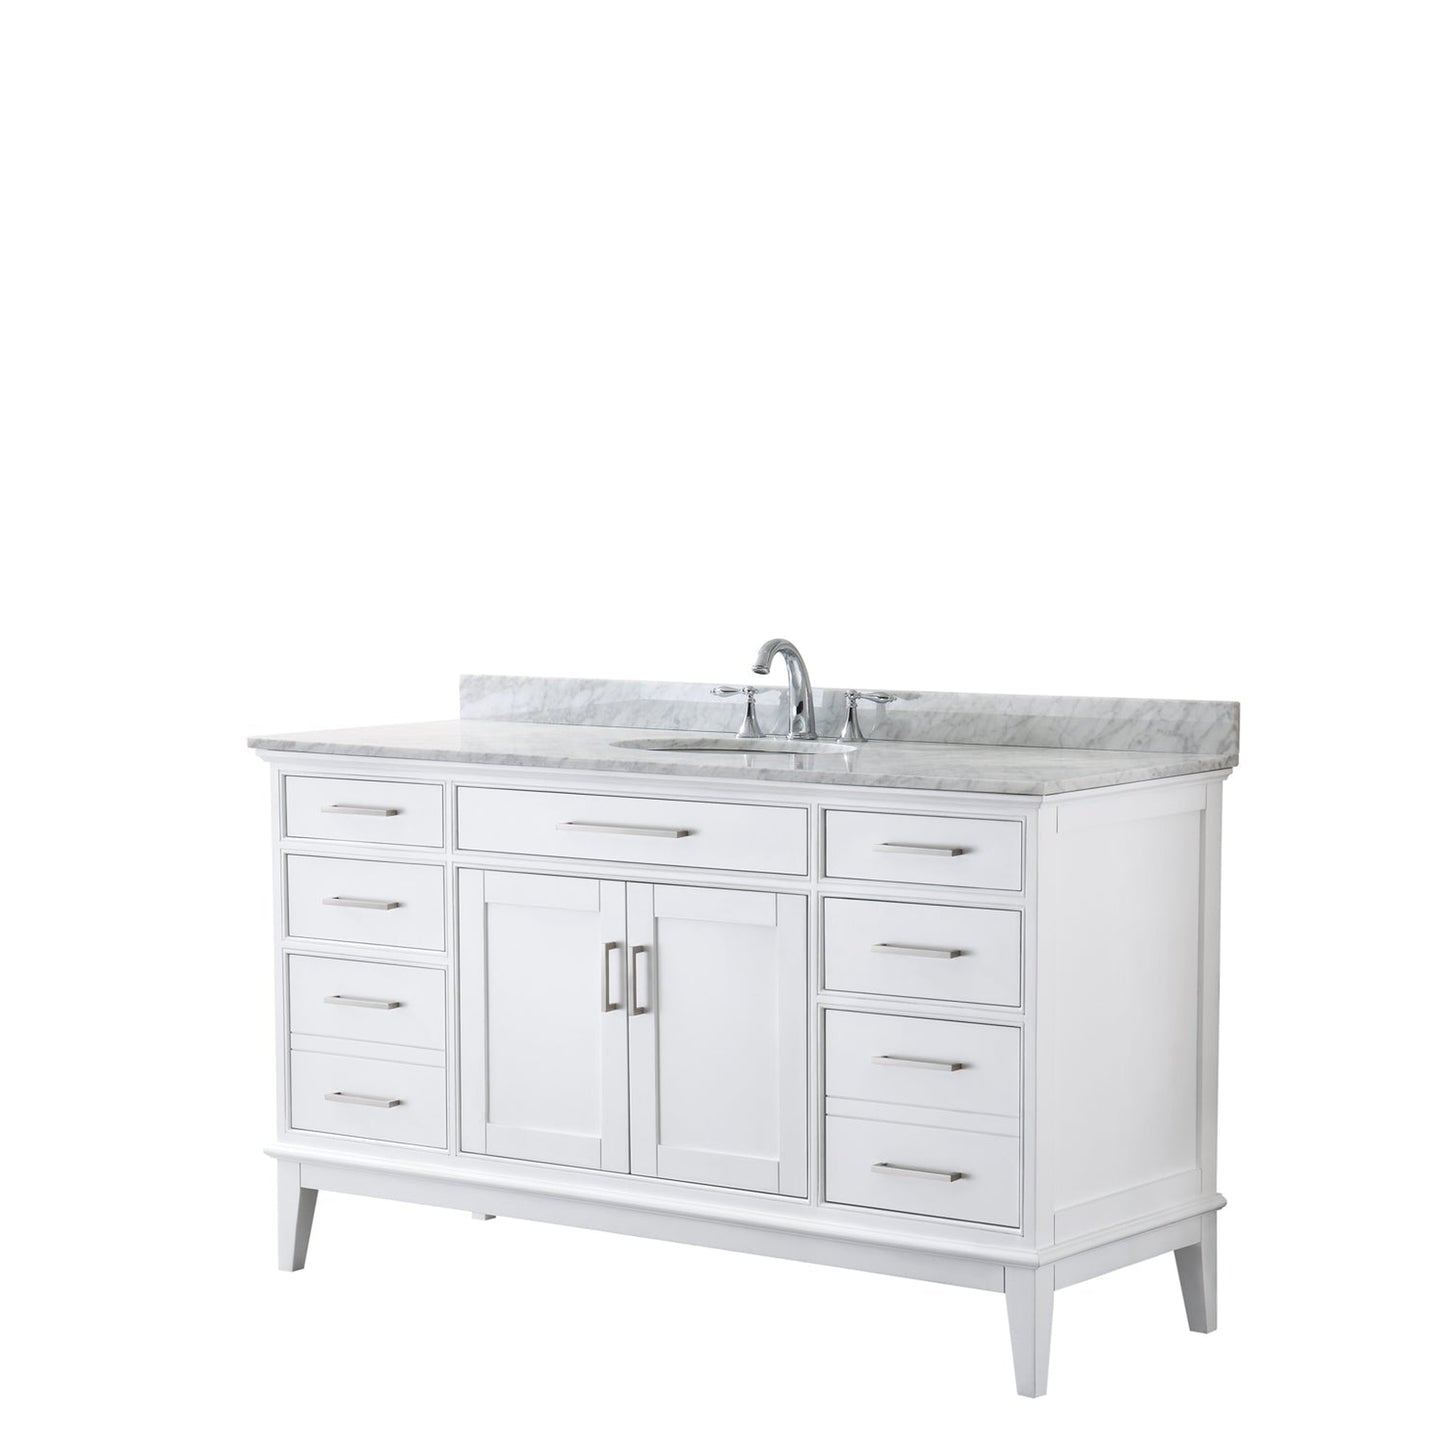 Wyndham Collection Margate 60" Single Bathroom White Vanity With White Carrara Marble Countertop And Undermount Oval Sink